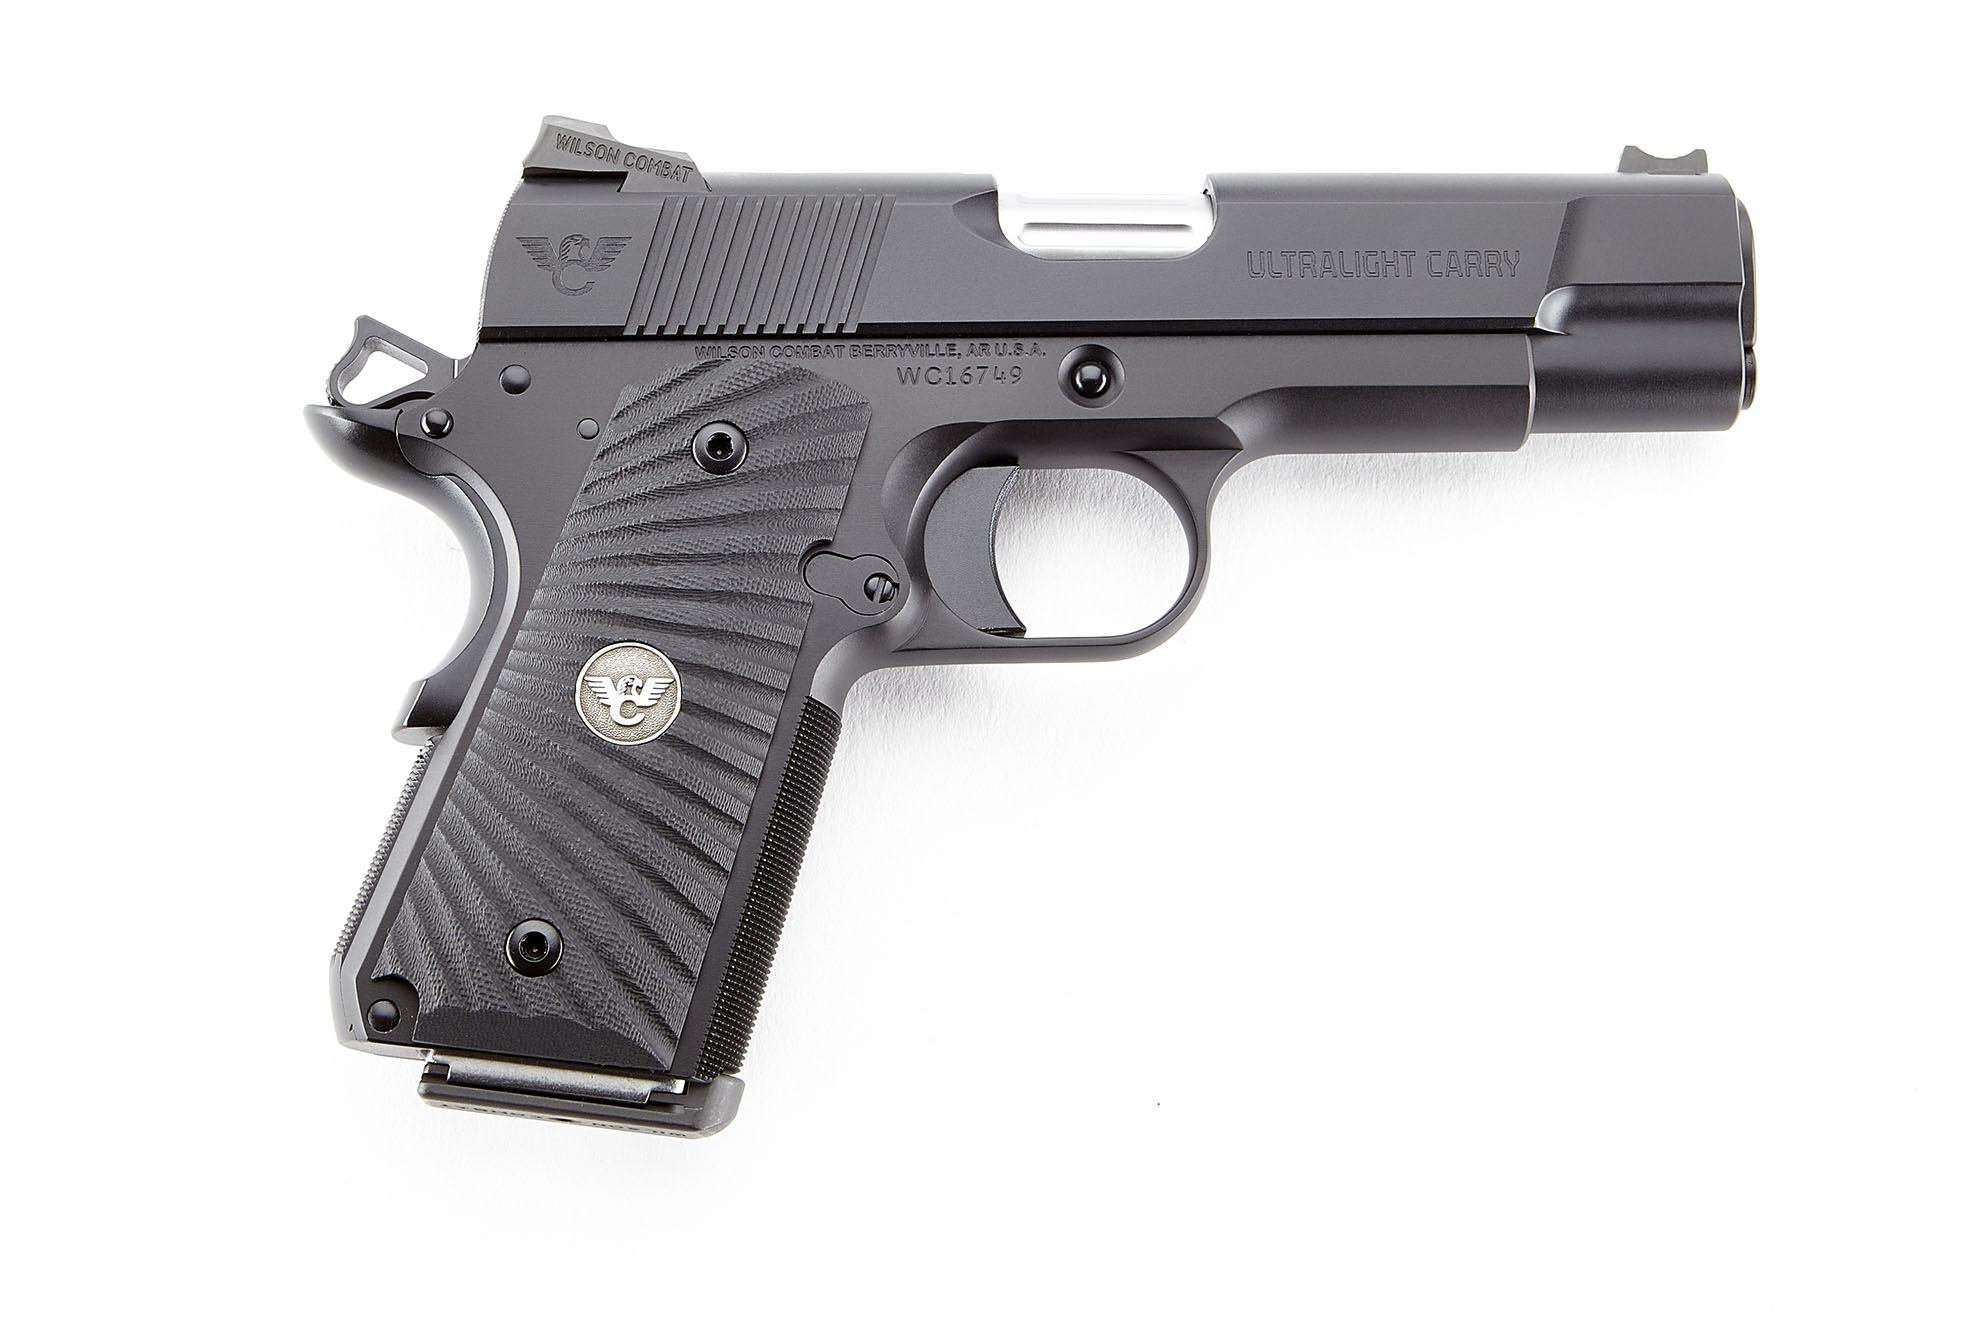 Wilson Combat ULC Commander Compact Review: Pros and cons of the ULC Commander Compact